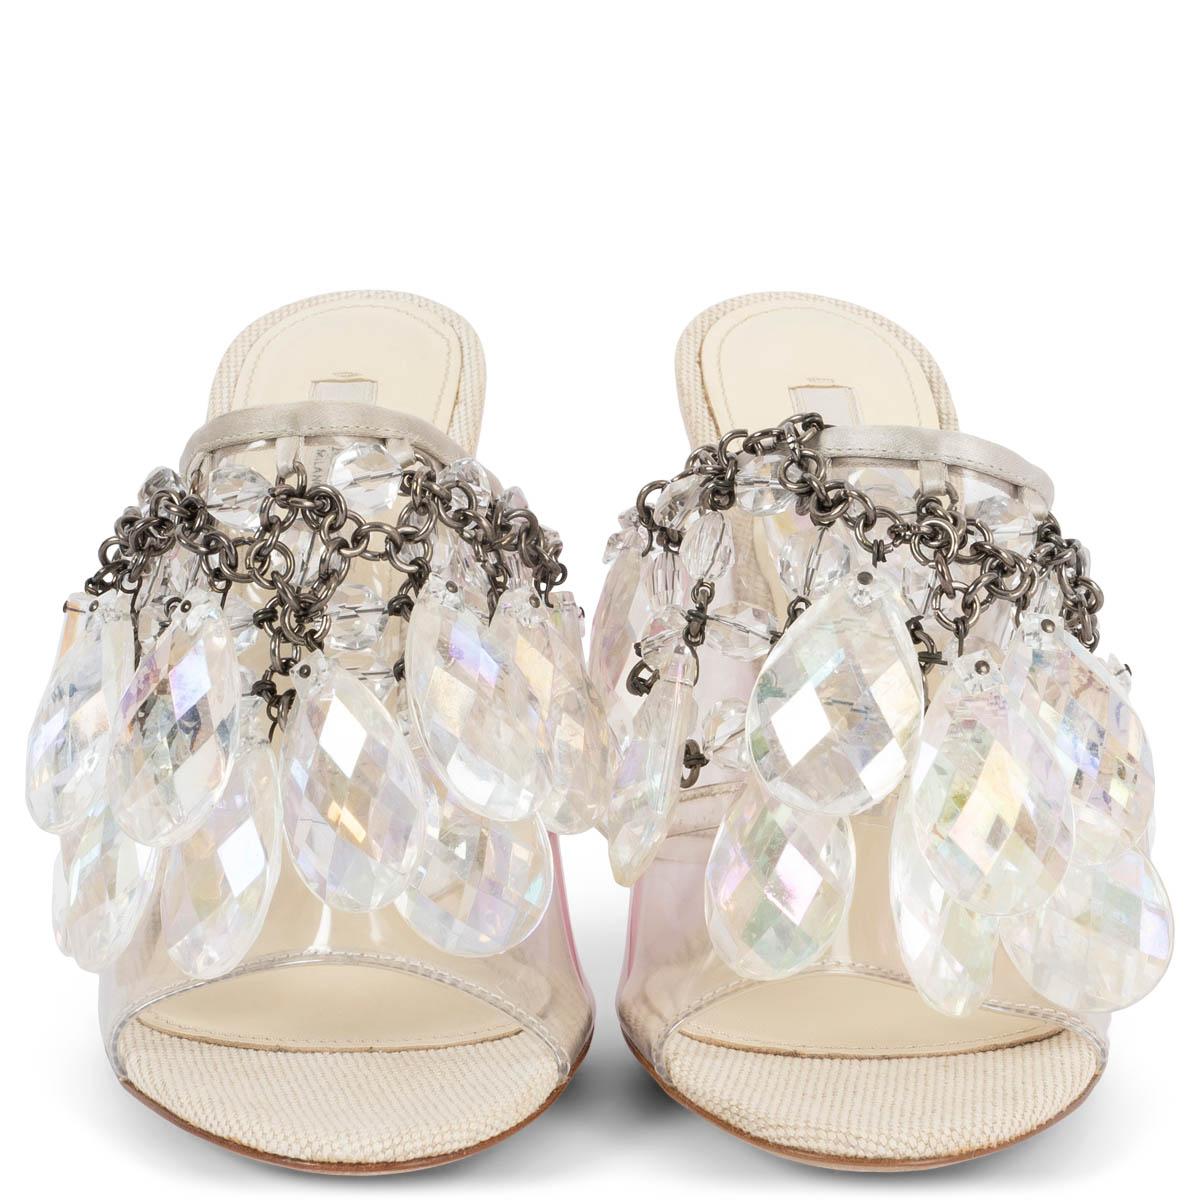 100% authentic Prada Chandalier sandals with clear pvc. Features iridescent crystals embellishments, a pink lucite heel and satin trim. Have been worn once inside and are in virtually new condition. Show some very soft glue stains on the canvas sole